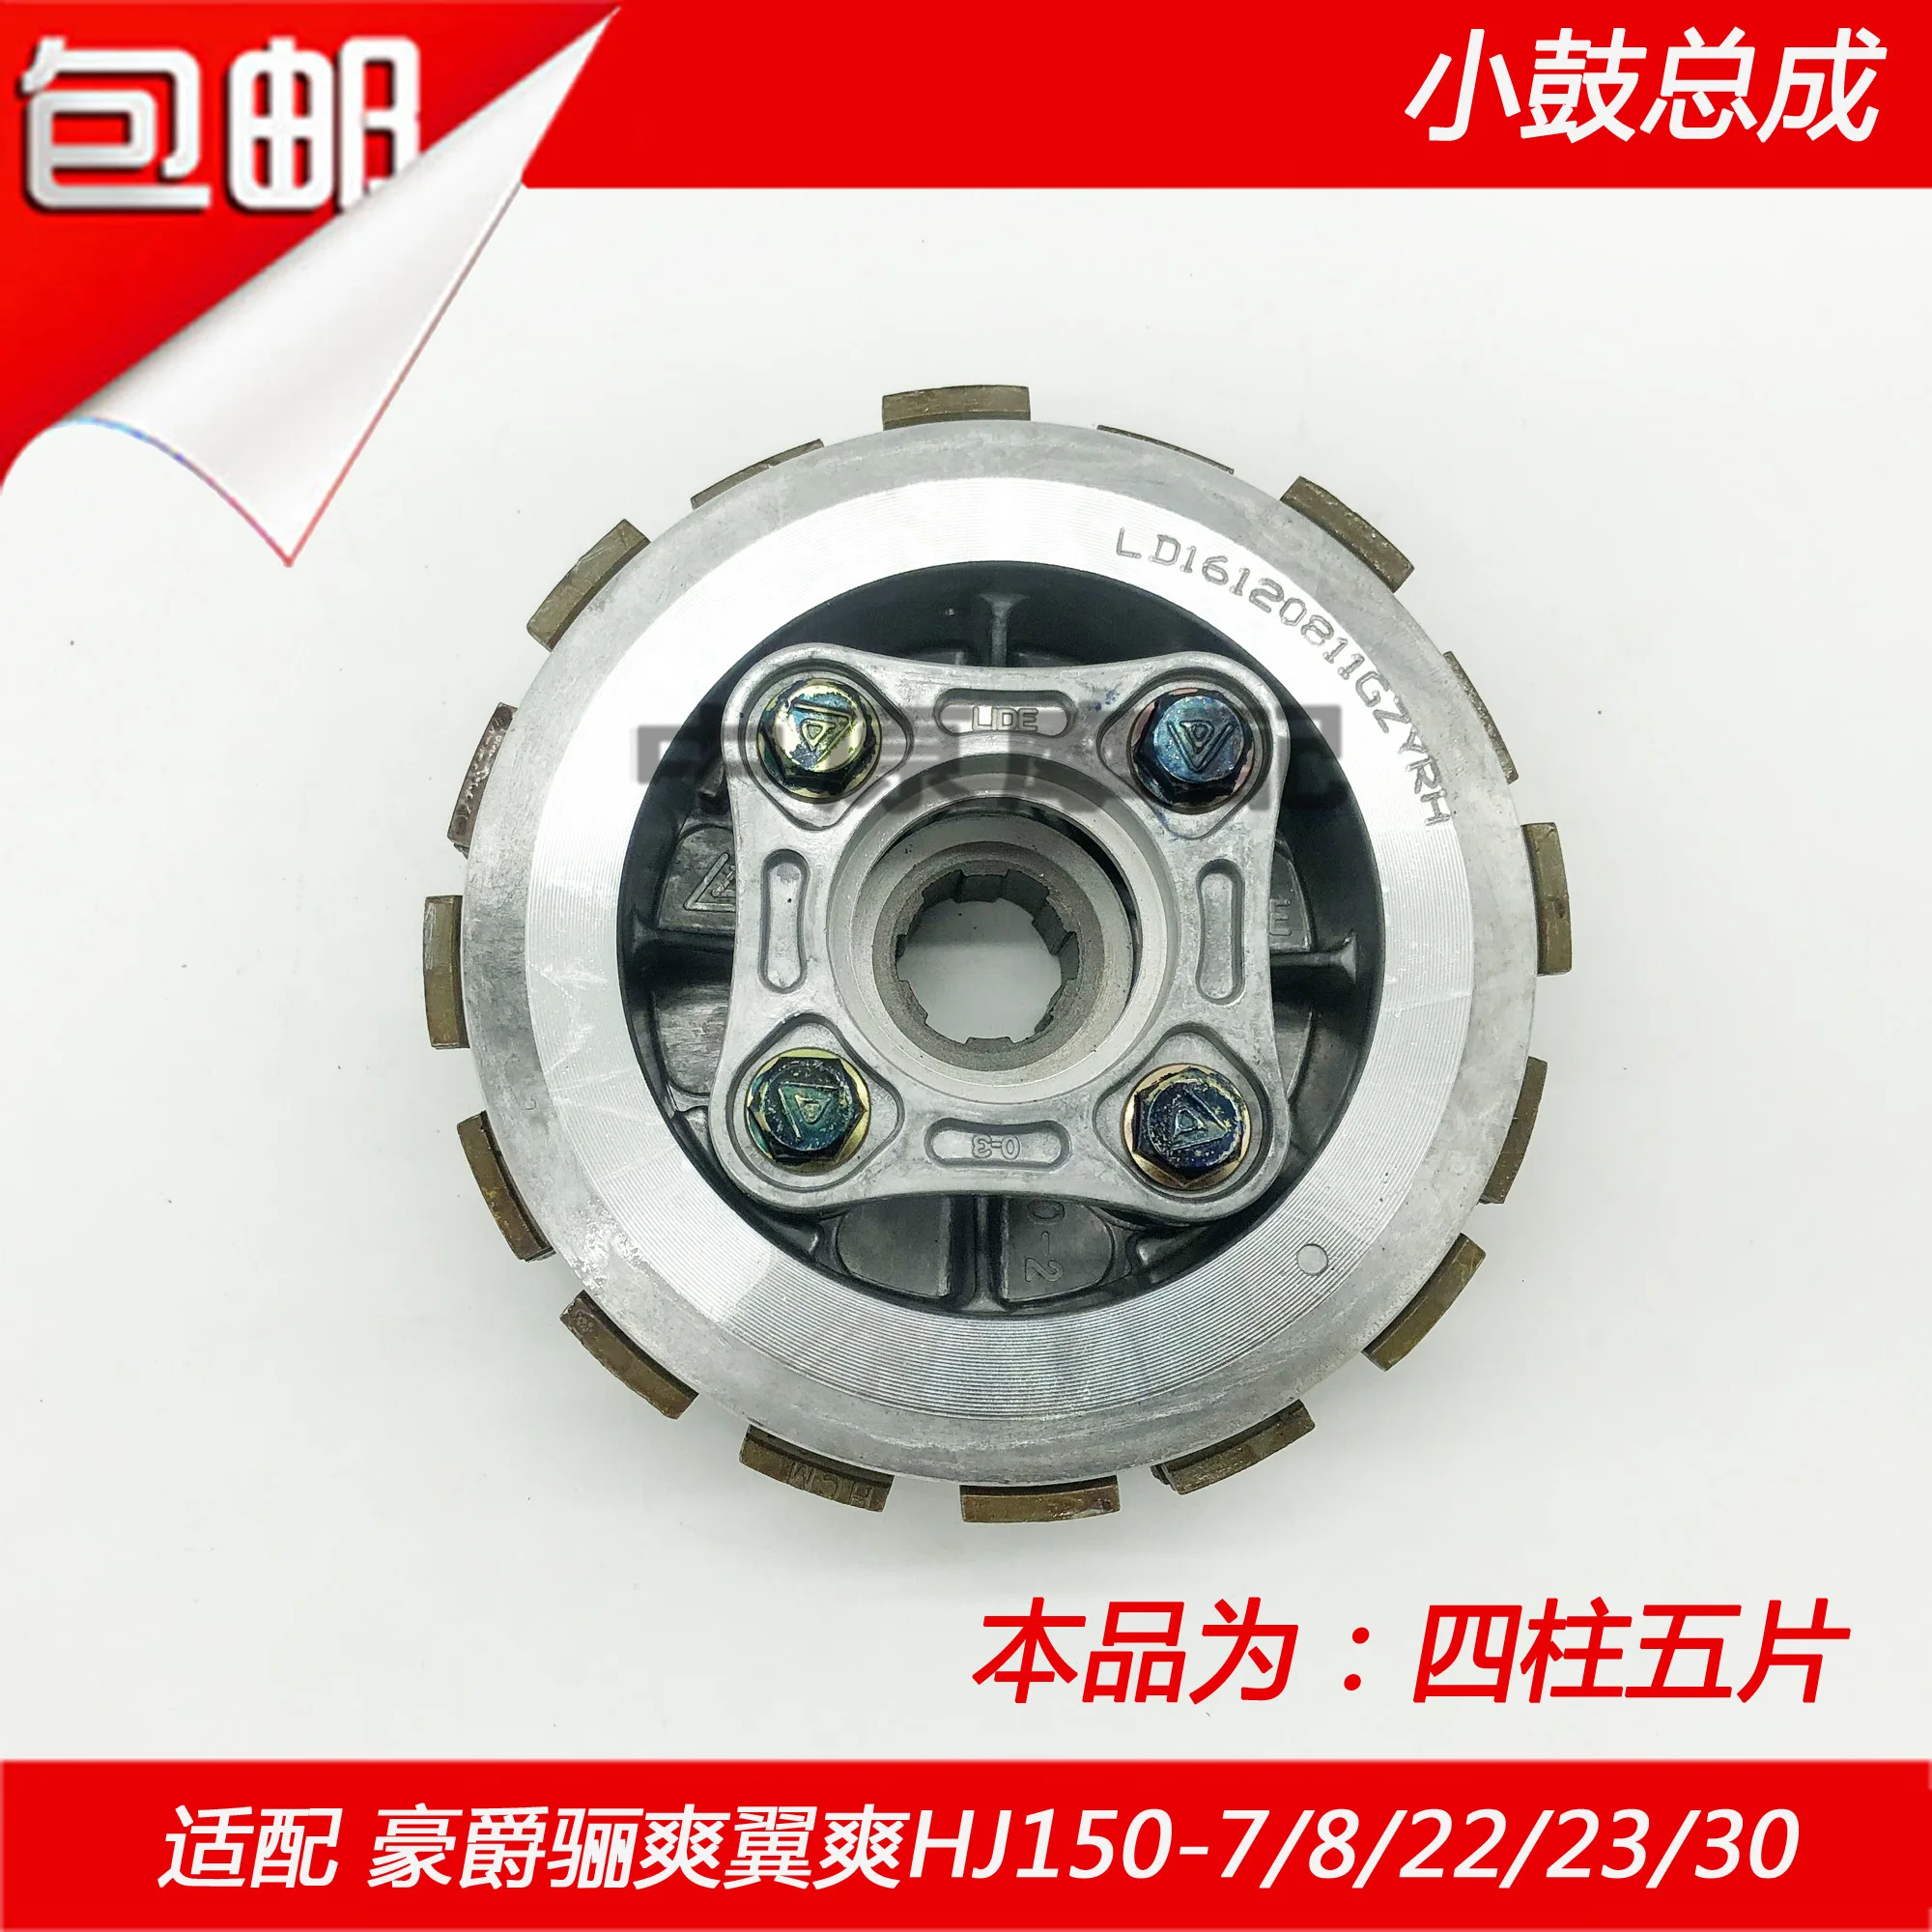 Haojue TR150S Accessories TR150 Motorcycle TR 150 Clutch Disc Clutch Snare Drum Driven Hub Snare Drum Clutch Plate